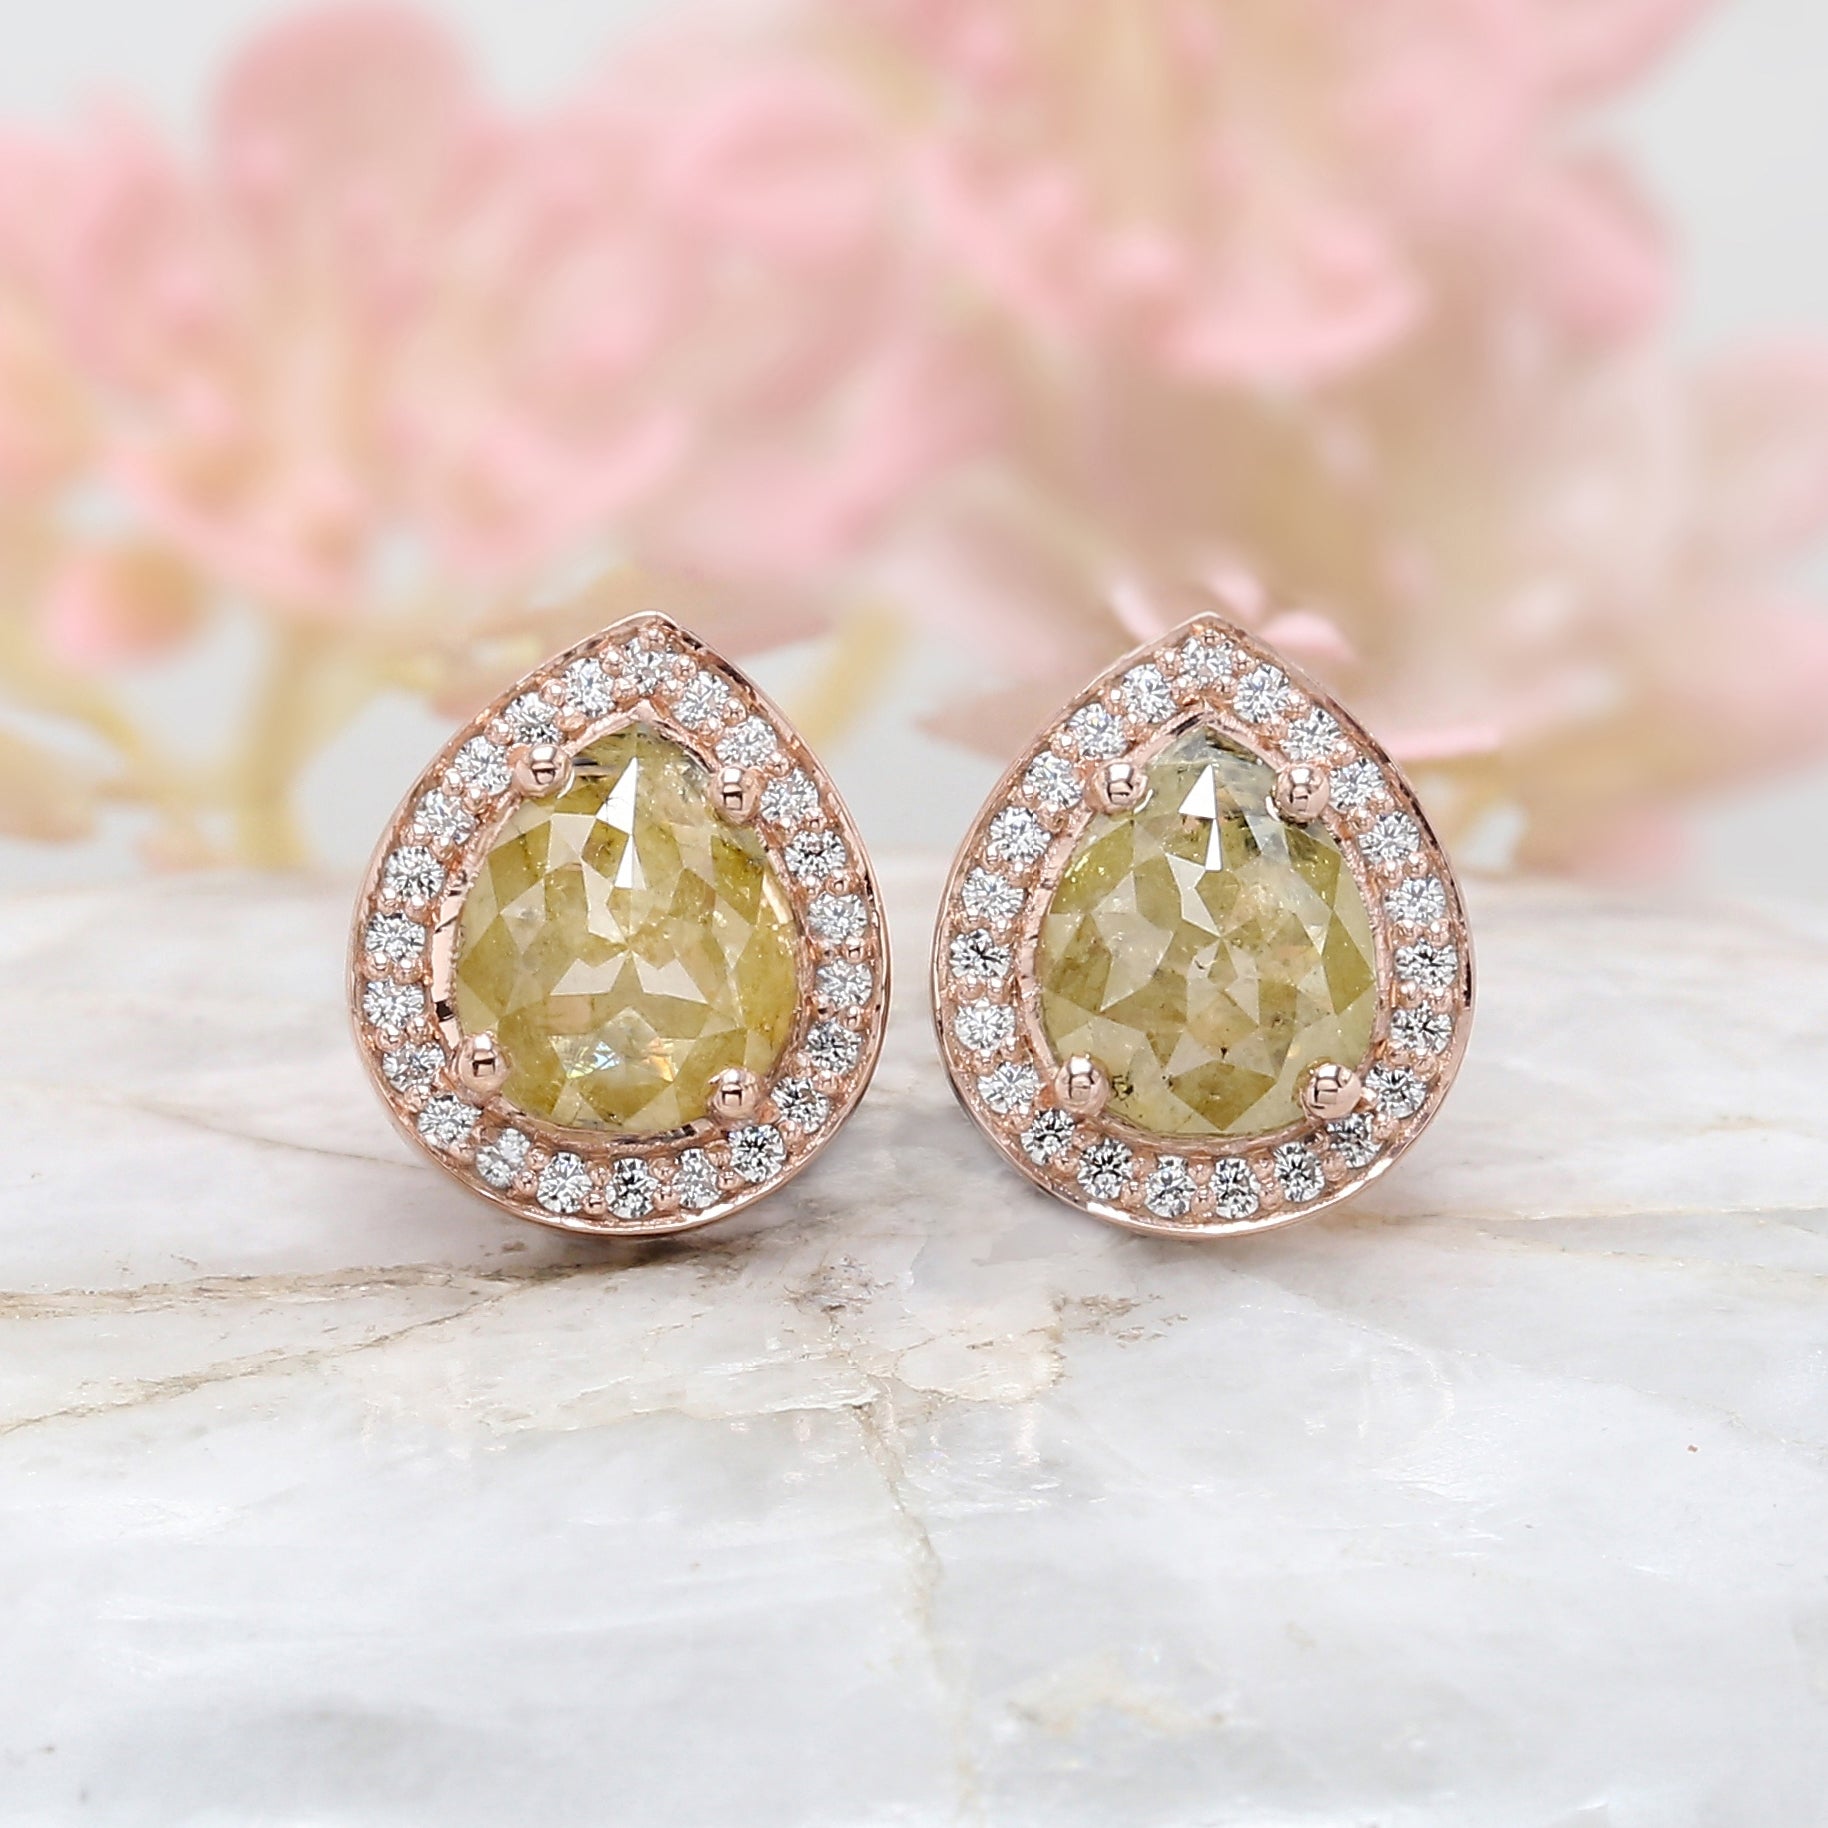 Pear Yellow Color Diamond Earring Engagement Wedding Gift Earring 14K Solid Rose White Yellow Gold Earring 2.37 CT KDN7027